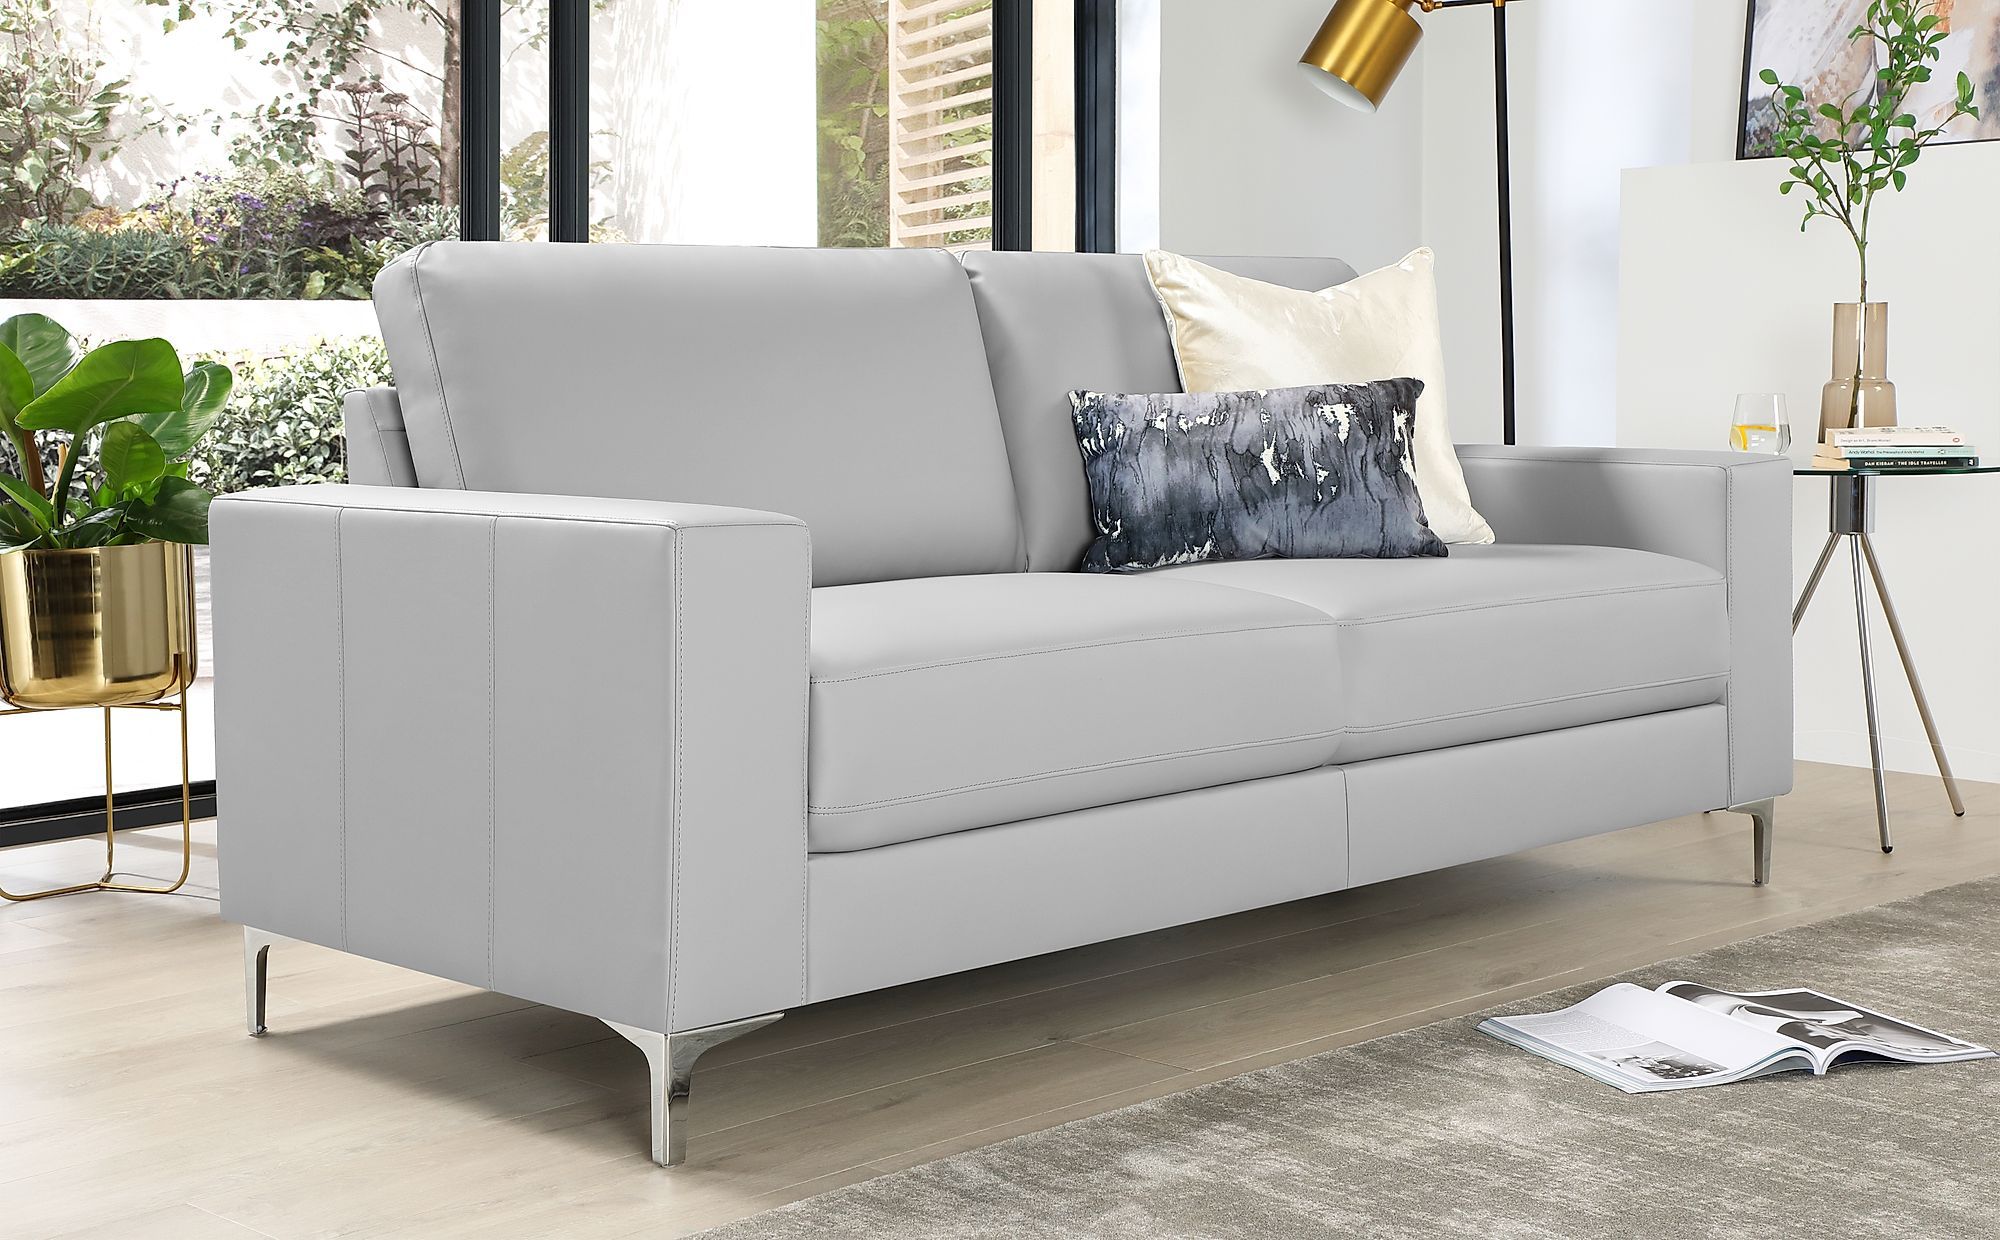 Baltimore Light Grey Leather 3 Seater Sofa | Furniture Choice With Regard To Sofas In Light Grey (View 2 of 20)